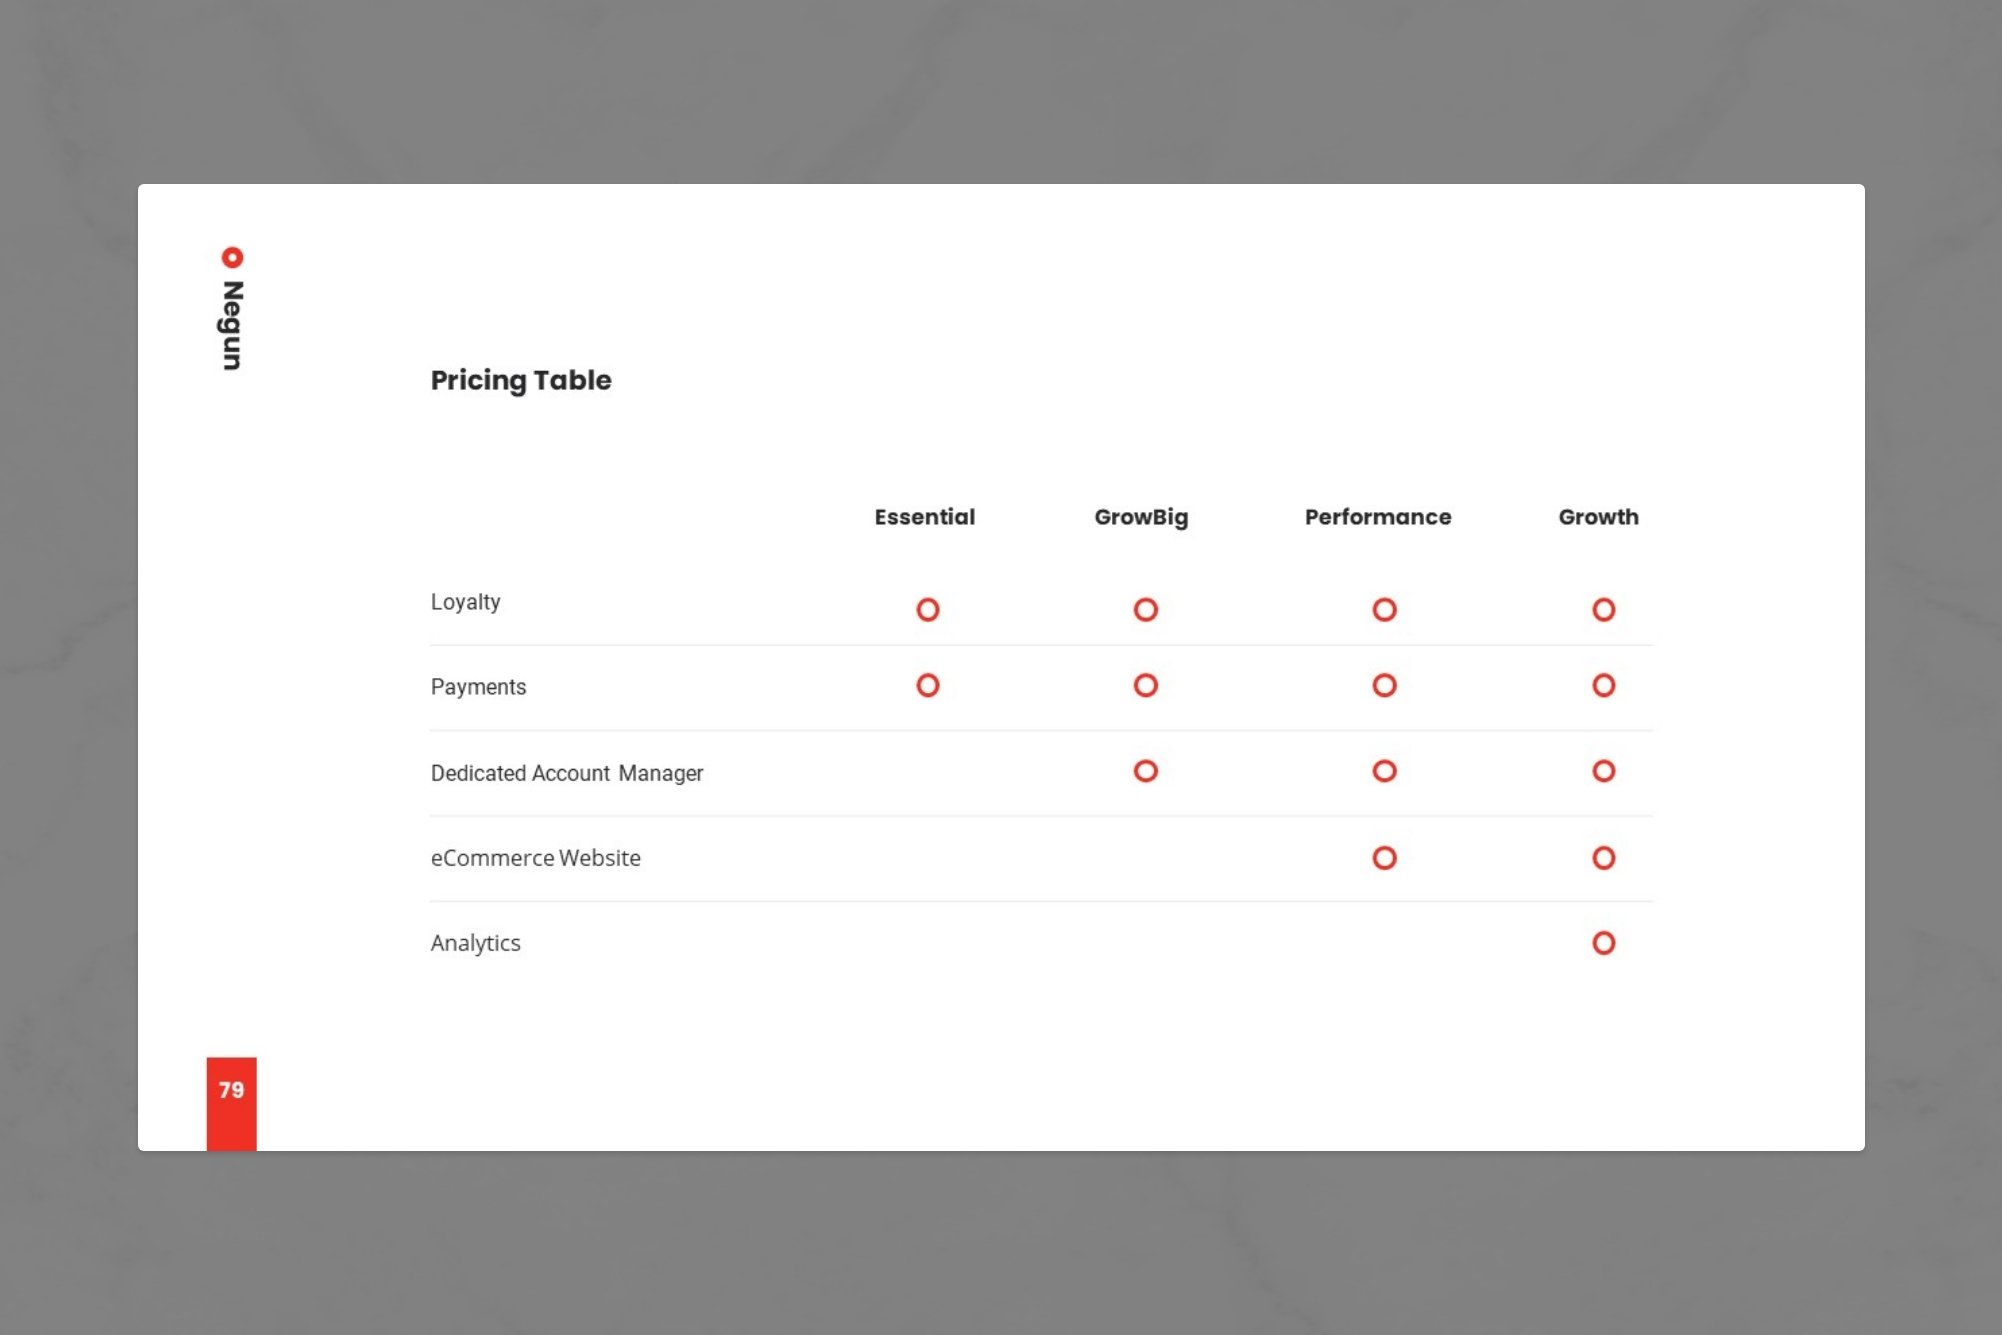 Pricing table on the white background with red points.